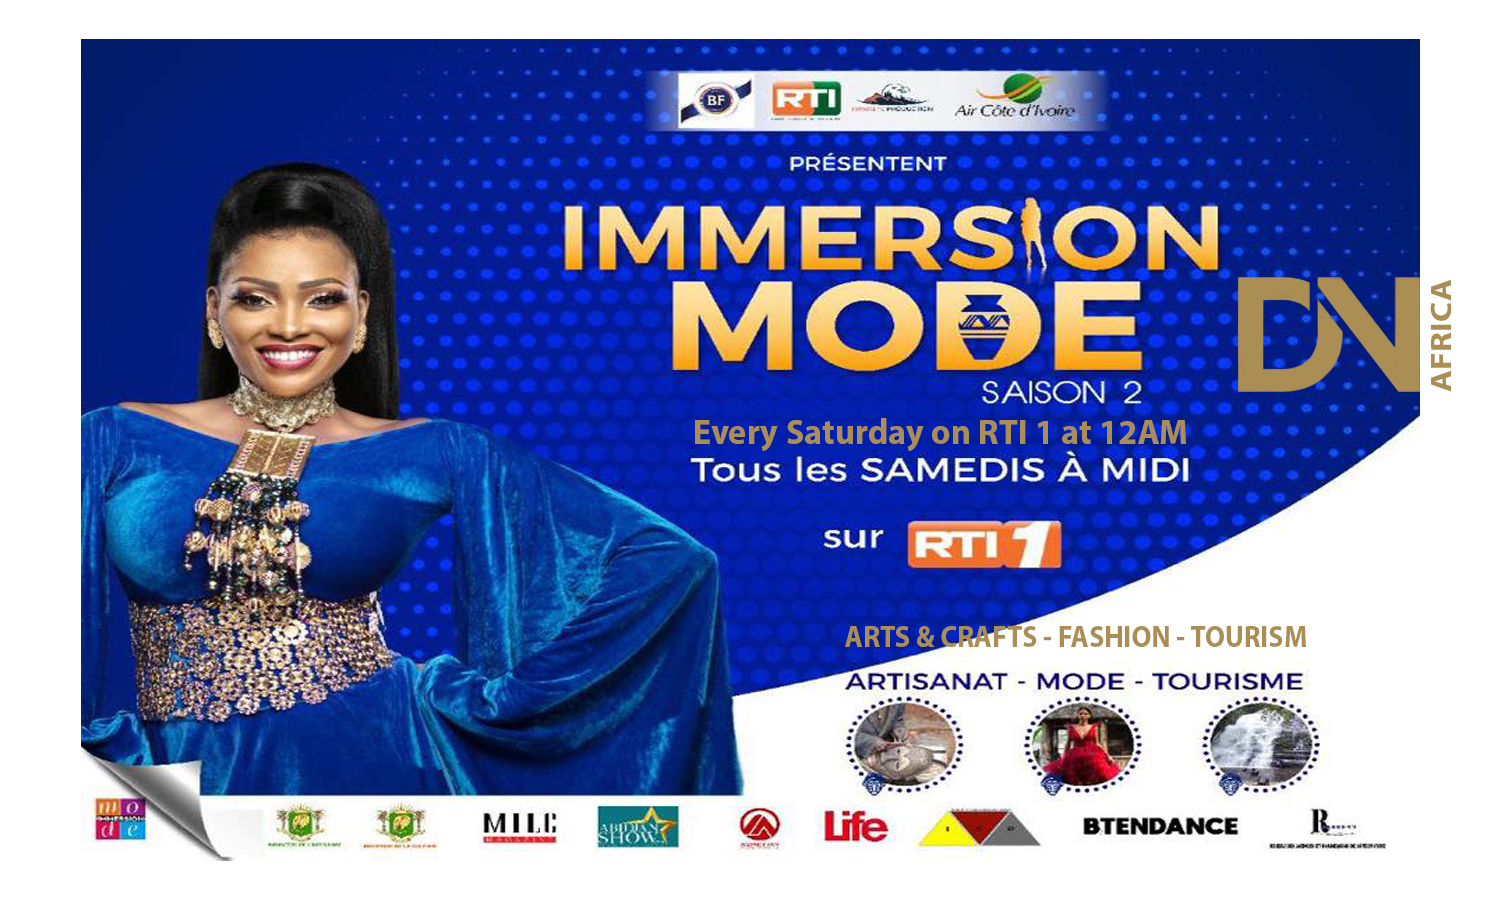 AFRICAN FASHION STYLE MAGAZINE - IMMERSION MODE BY LINE JABER – SEASON 2 - A TELEVISION CULTURAL SHOW - from Ivory Coast for RTI1 - Photographer DAN NGU - Media Partner DN AFRICA - STUDIO 24 NIGERIA - STUDIO 24 INTERNATIONAL - Ifeanyi Christopher Oputa MD AND CEO OF COLVI LIMITED AND STUDIO 24 - Nahomie NOOR COULIBALY